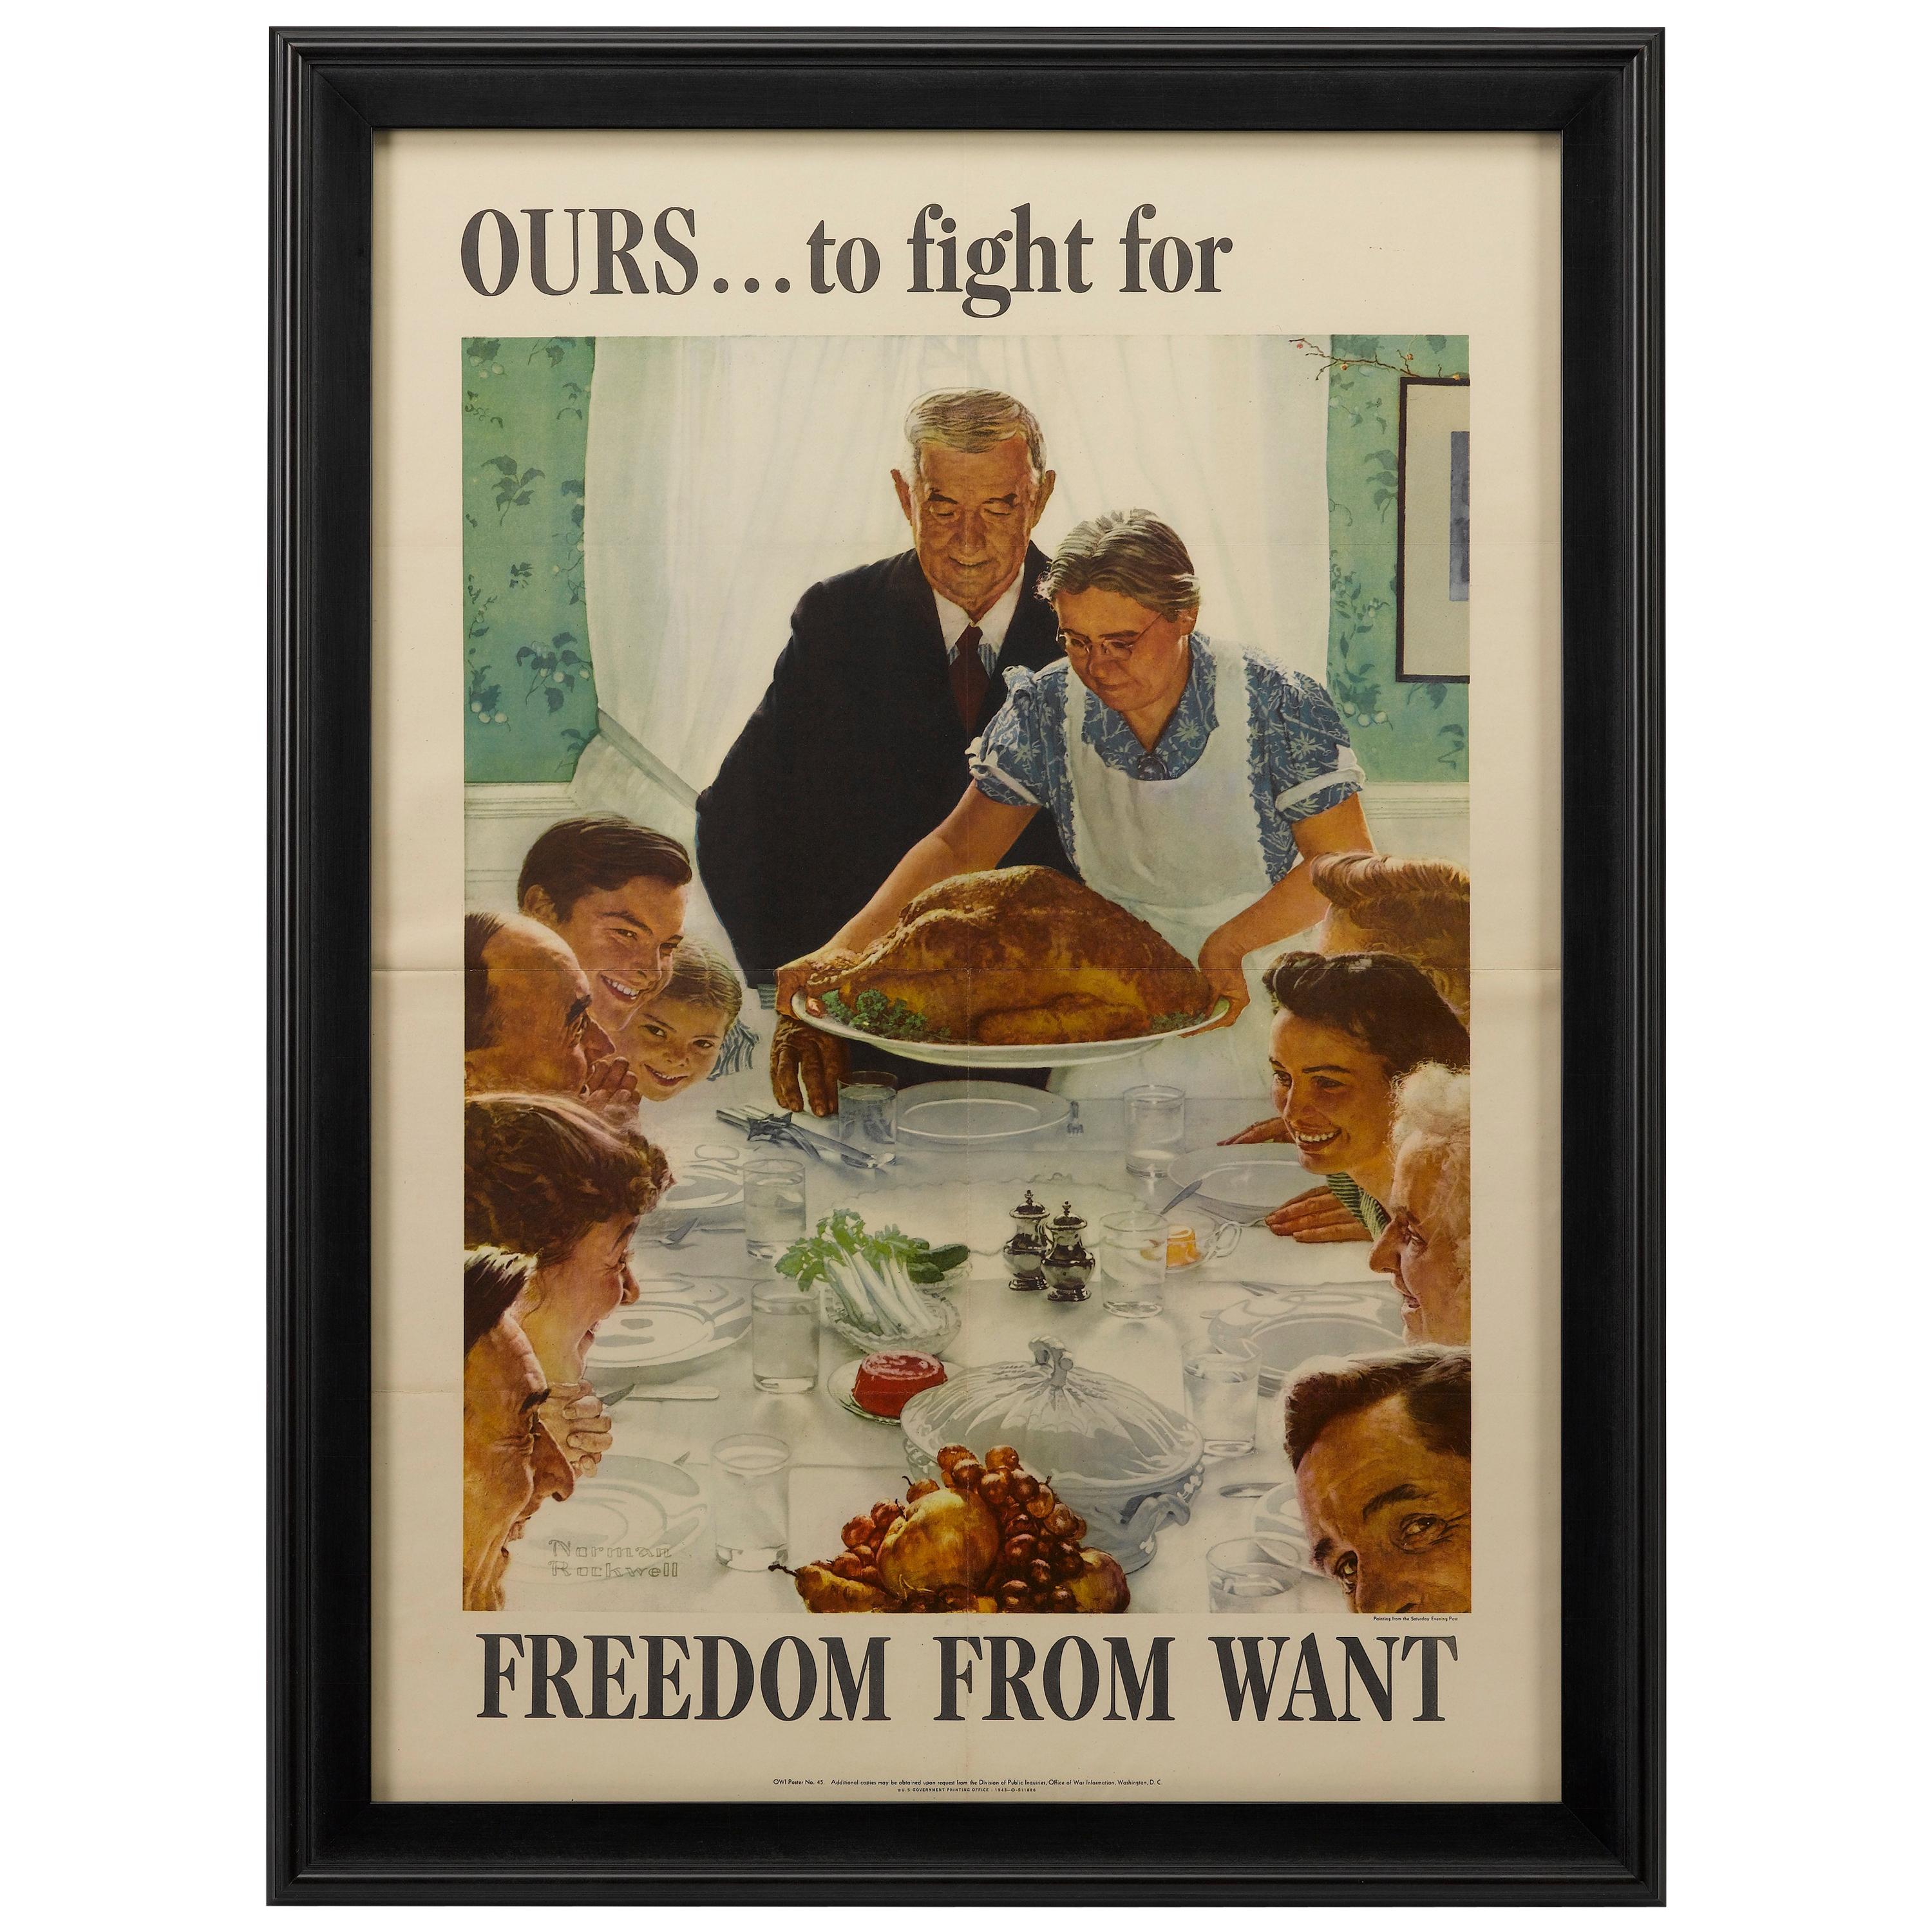 "Four Freedoms" Set of 4 Norman Rockwell World War II Bond Posters, circa 1942